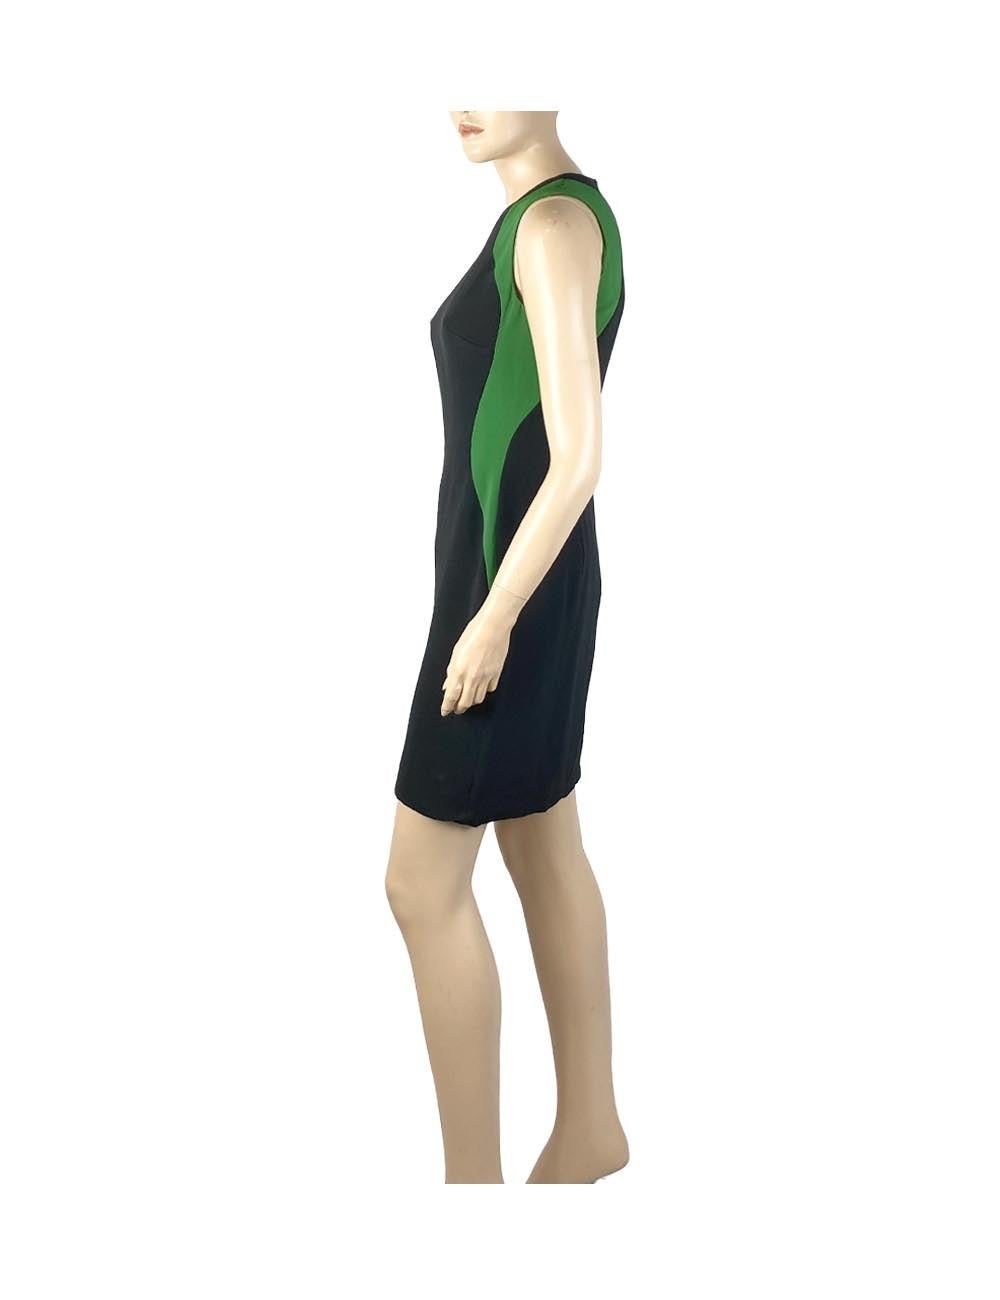 Stella McCartney Black bodycon Stella McCartney dress with green detail. 

Material: Rayon and Acetate 
Size: IT 40
Bust: 84cm
Waist: 67cm
Hip: 92cm
Overall Condition: Excellent 